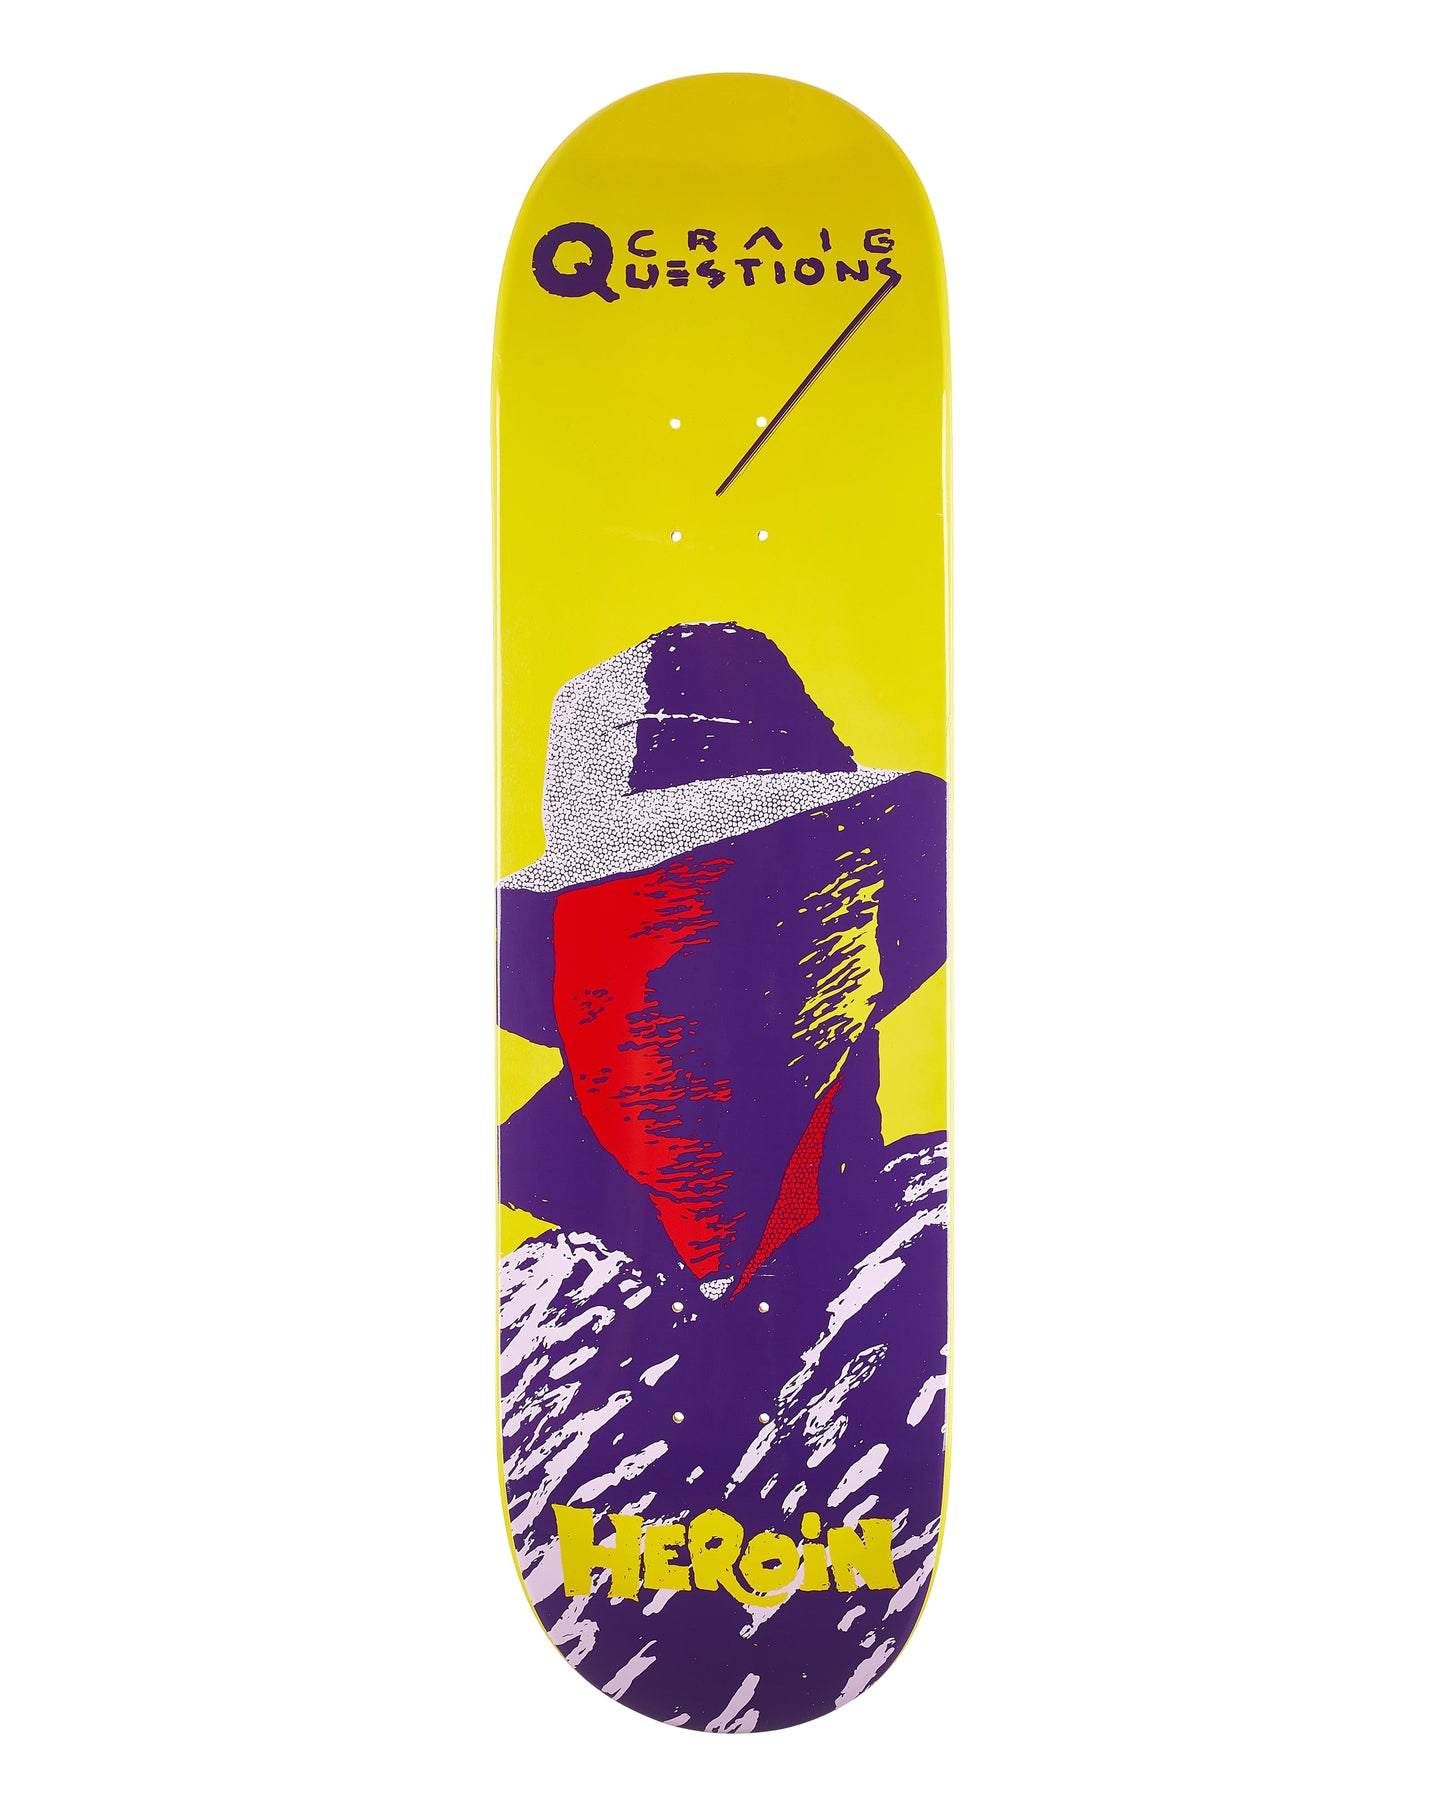 8.75 HEROIN QUESTIONS GIALLO DECK